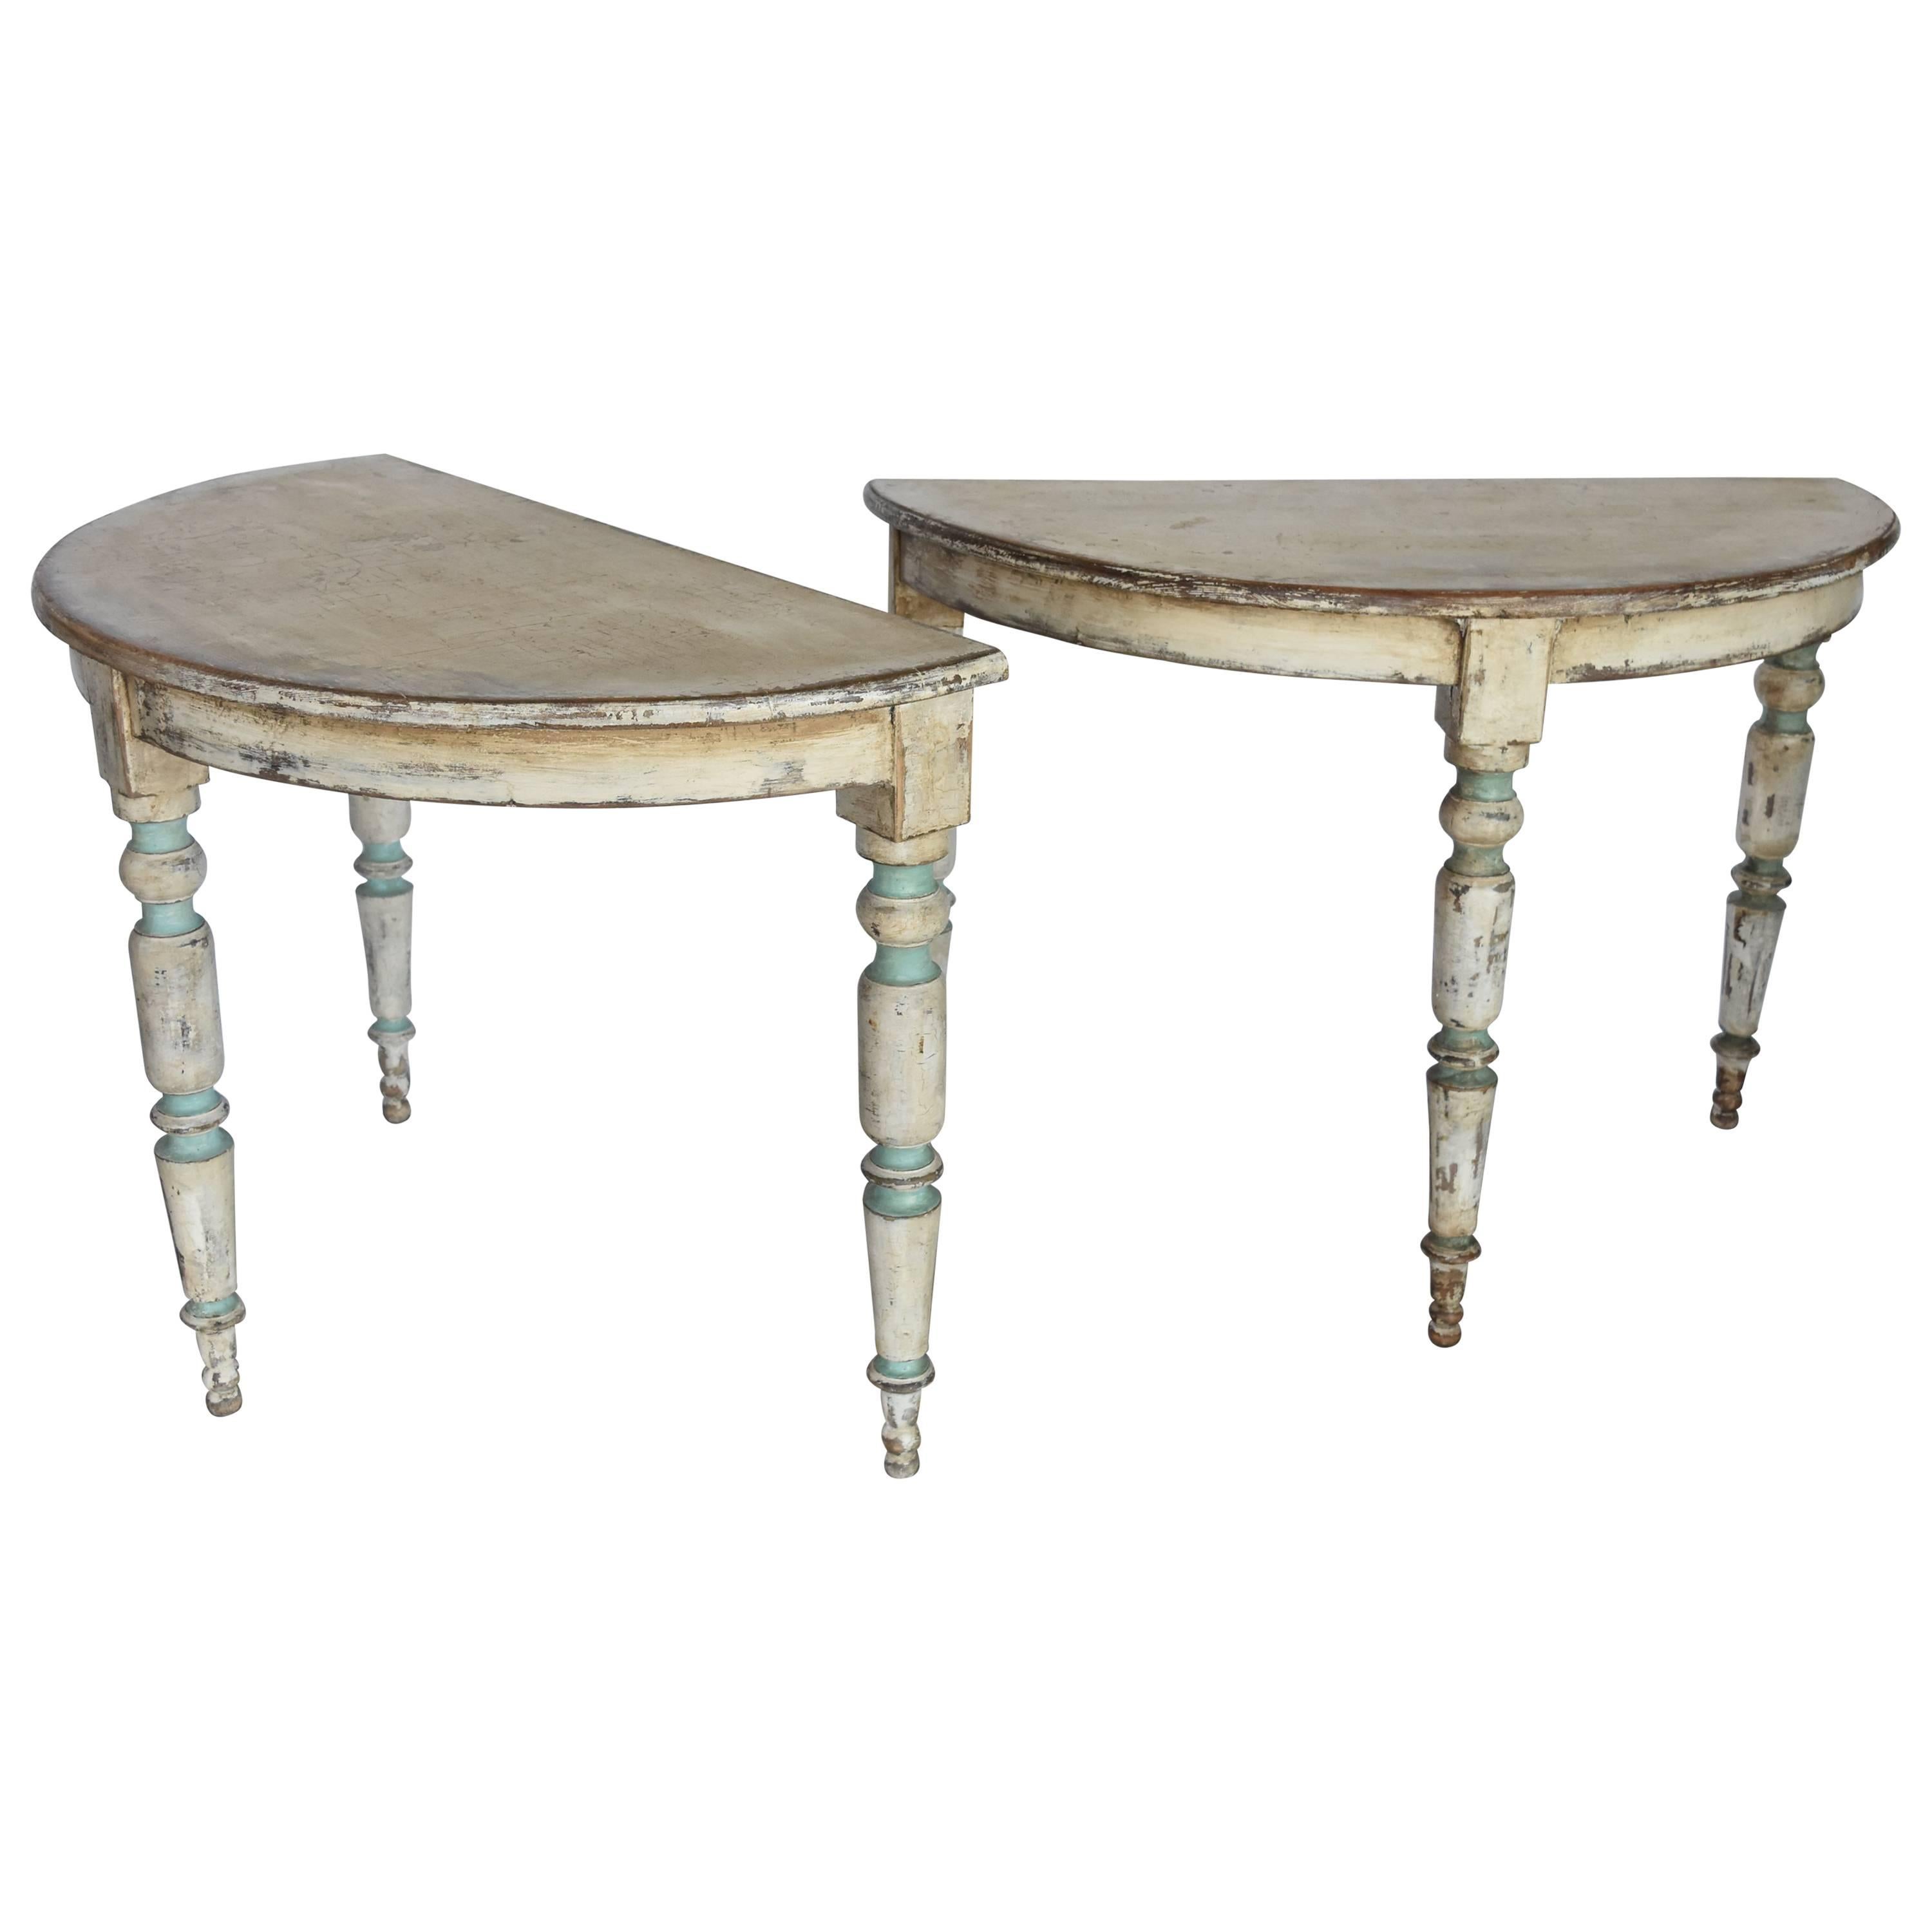 Spanish 1900s Demilune Tables With Later Creamy White Paint And Blue Accents